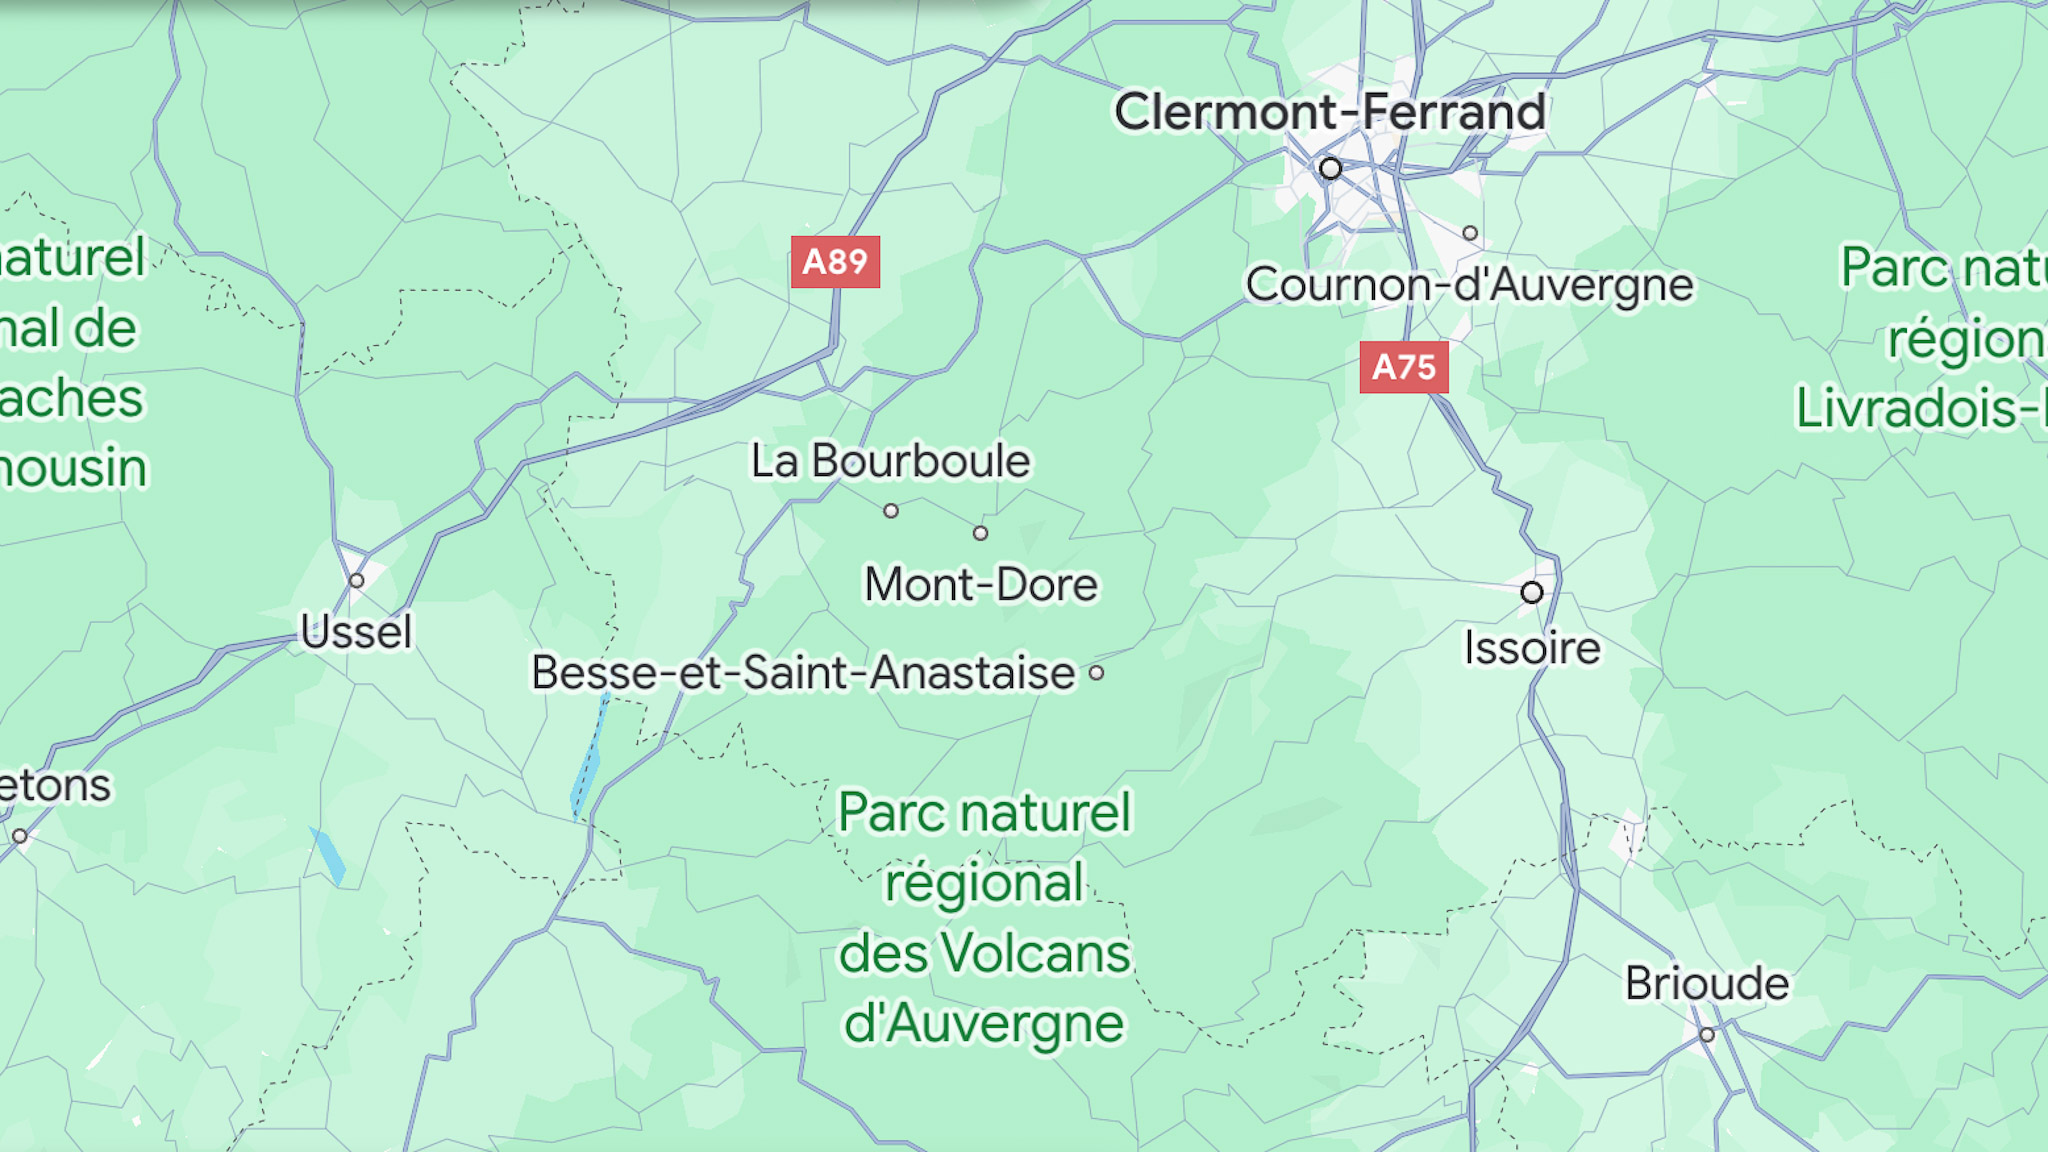 Location of the Auvergne Volcanoes Regional Natural Park